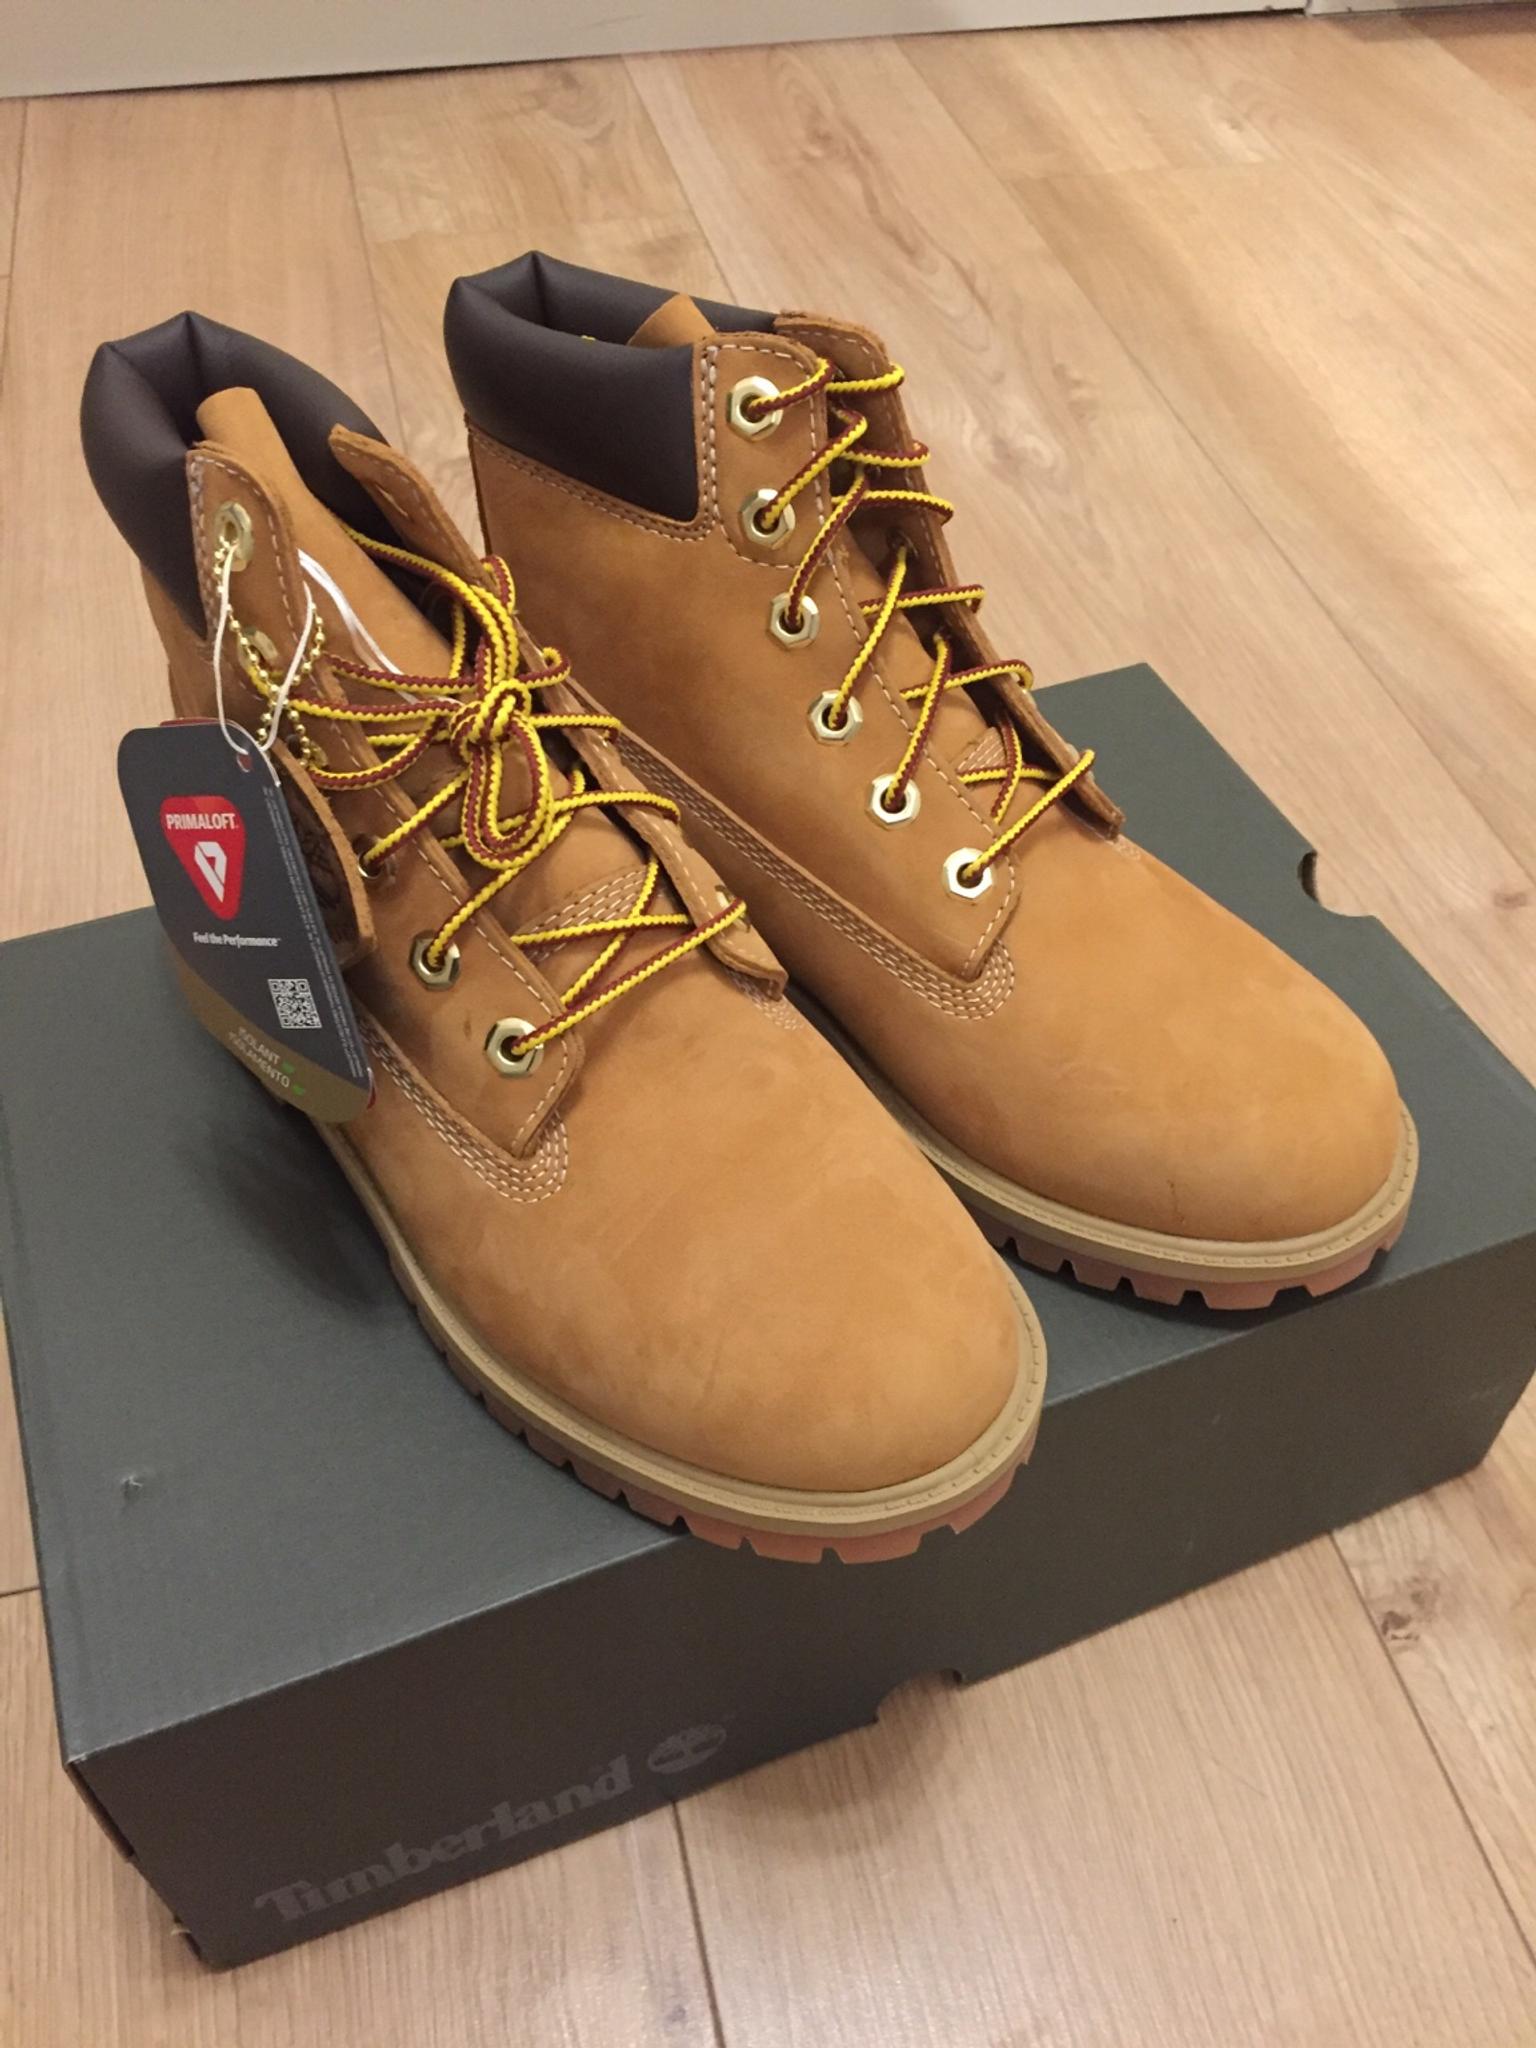 Timberland mid boot, size 5, Brand new 